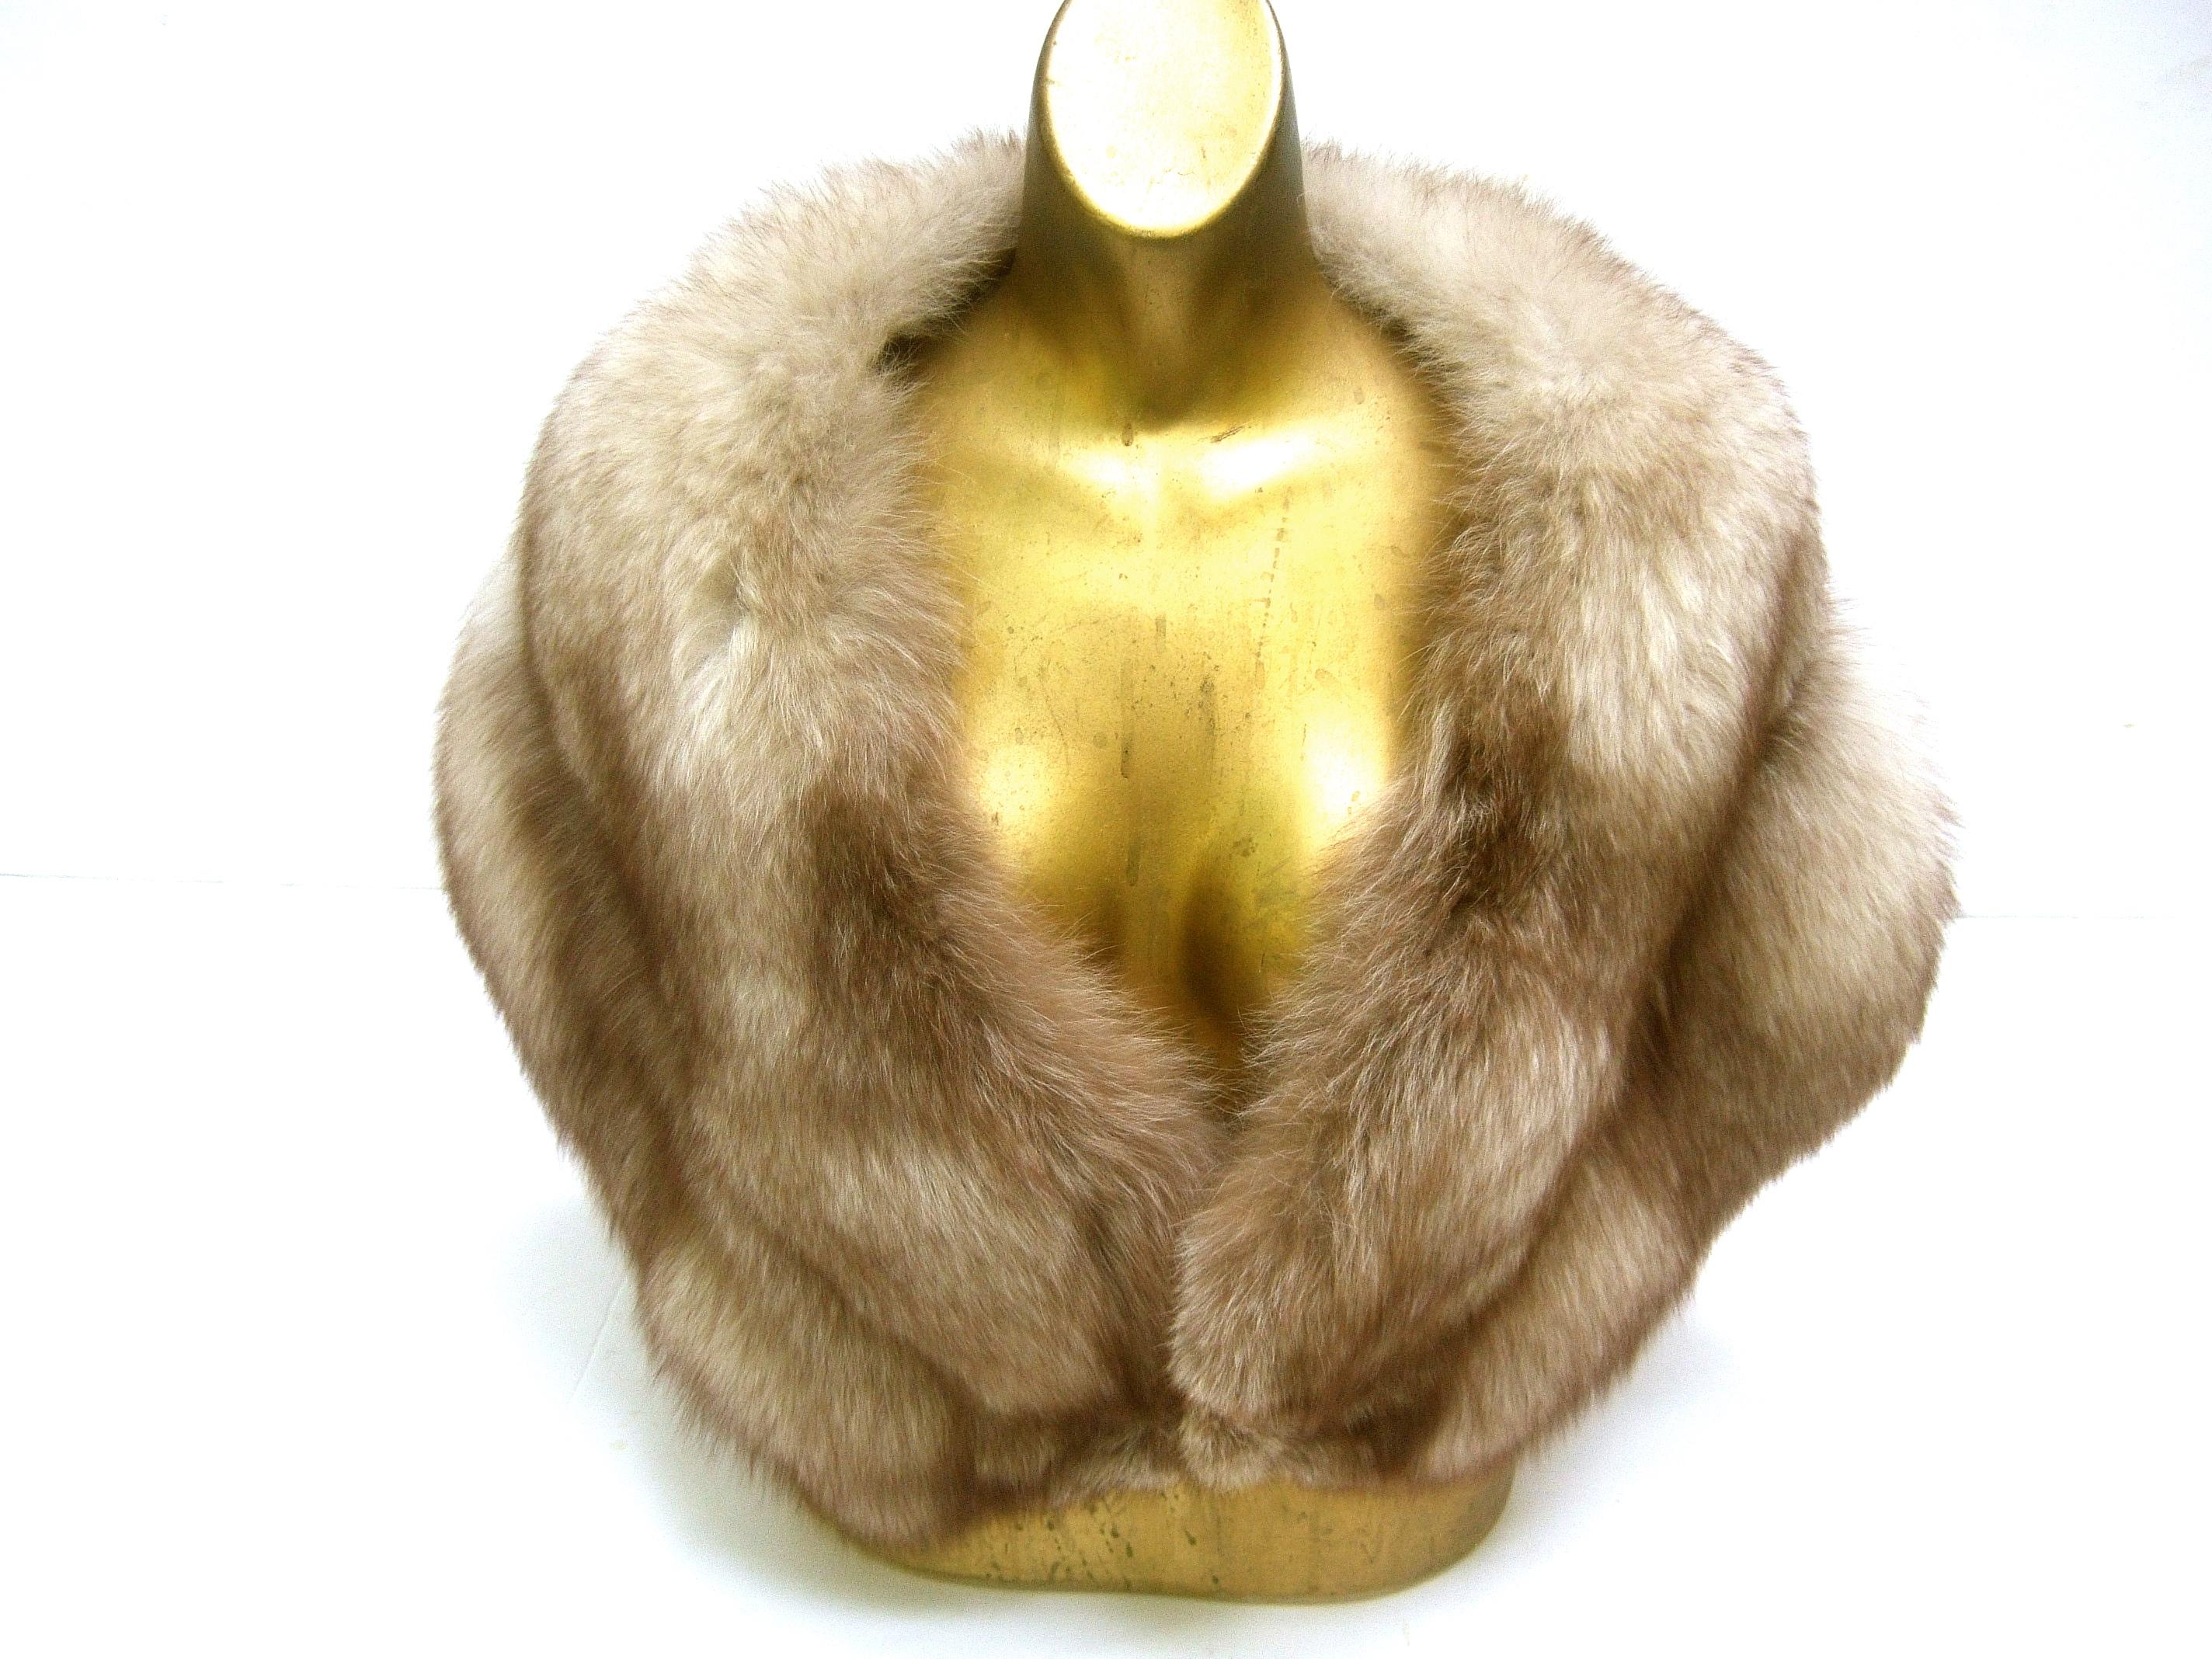 Luxurious plush fluffy fox fur stole c 1960s
The elegant soft fox stole is designed
with a pair of fox fur pelts that secure
with a single hook closure. Accented
with streaks of gray fur  

The interior is lined with mocha brown 
color satin with a